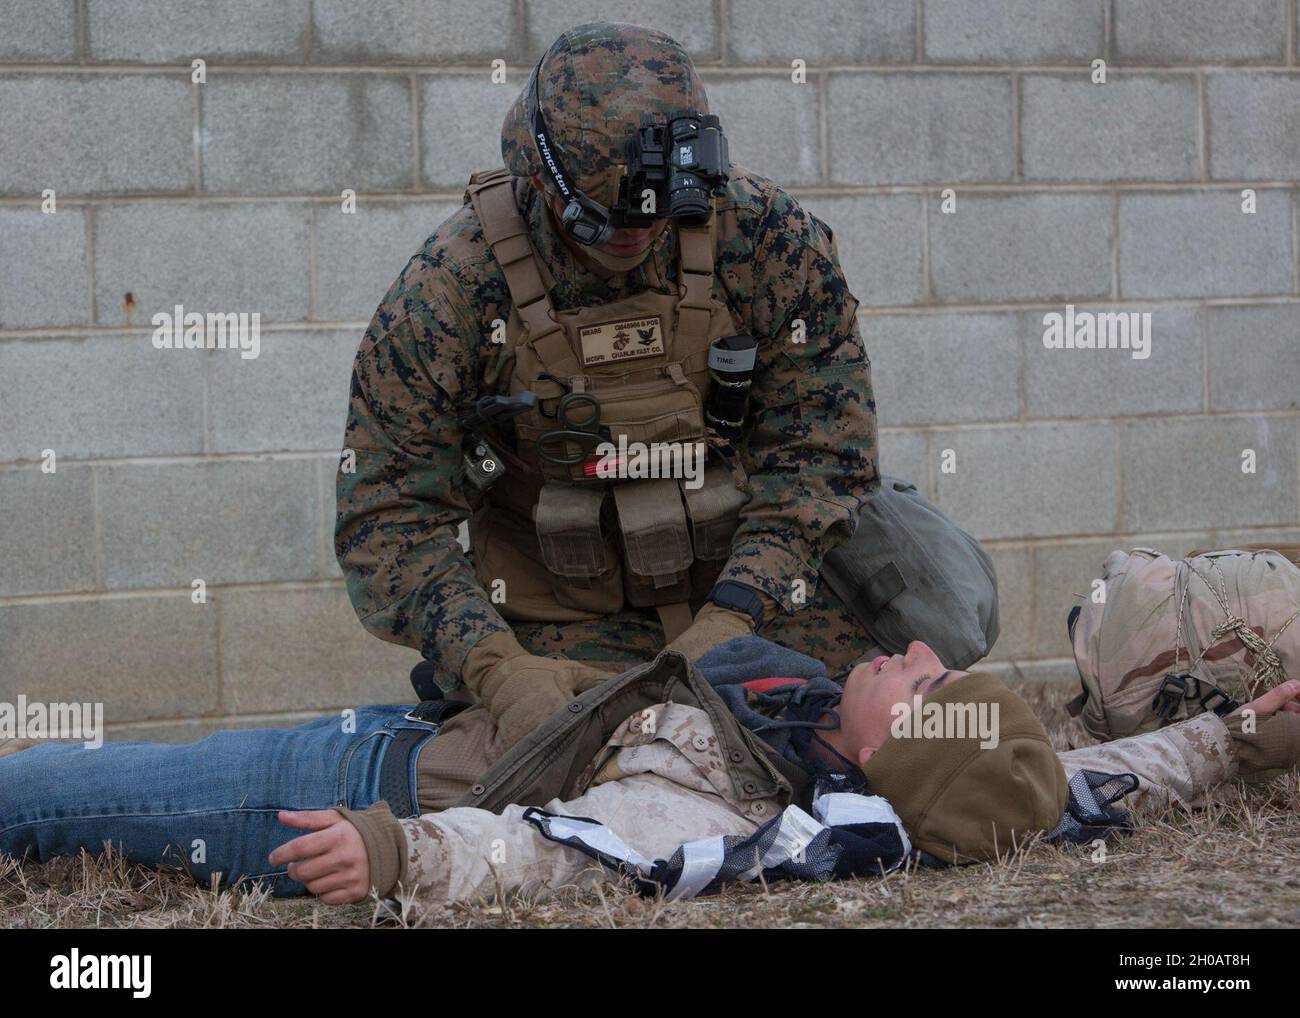 U.S. Navy Petty Officer 3rd Class Robert Mears, a corpsman with Charlie FAST Company, 5th Platoon, Marine Corps Security Force Regiment applies first aid to a notional gunshot wound during a Mission Readiness Exercise (MRX) Jan 13, 2021, on Fort A. P. Hill in Port Royal, Virginia. Fleet Antiterrorism Security Team (FAST) platoons execute MRX exercises prior to deployment to evaluate the platoons’ proficiency in core mission essential tasks. Stock Photo